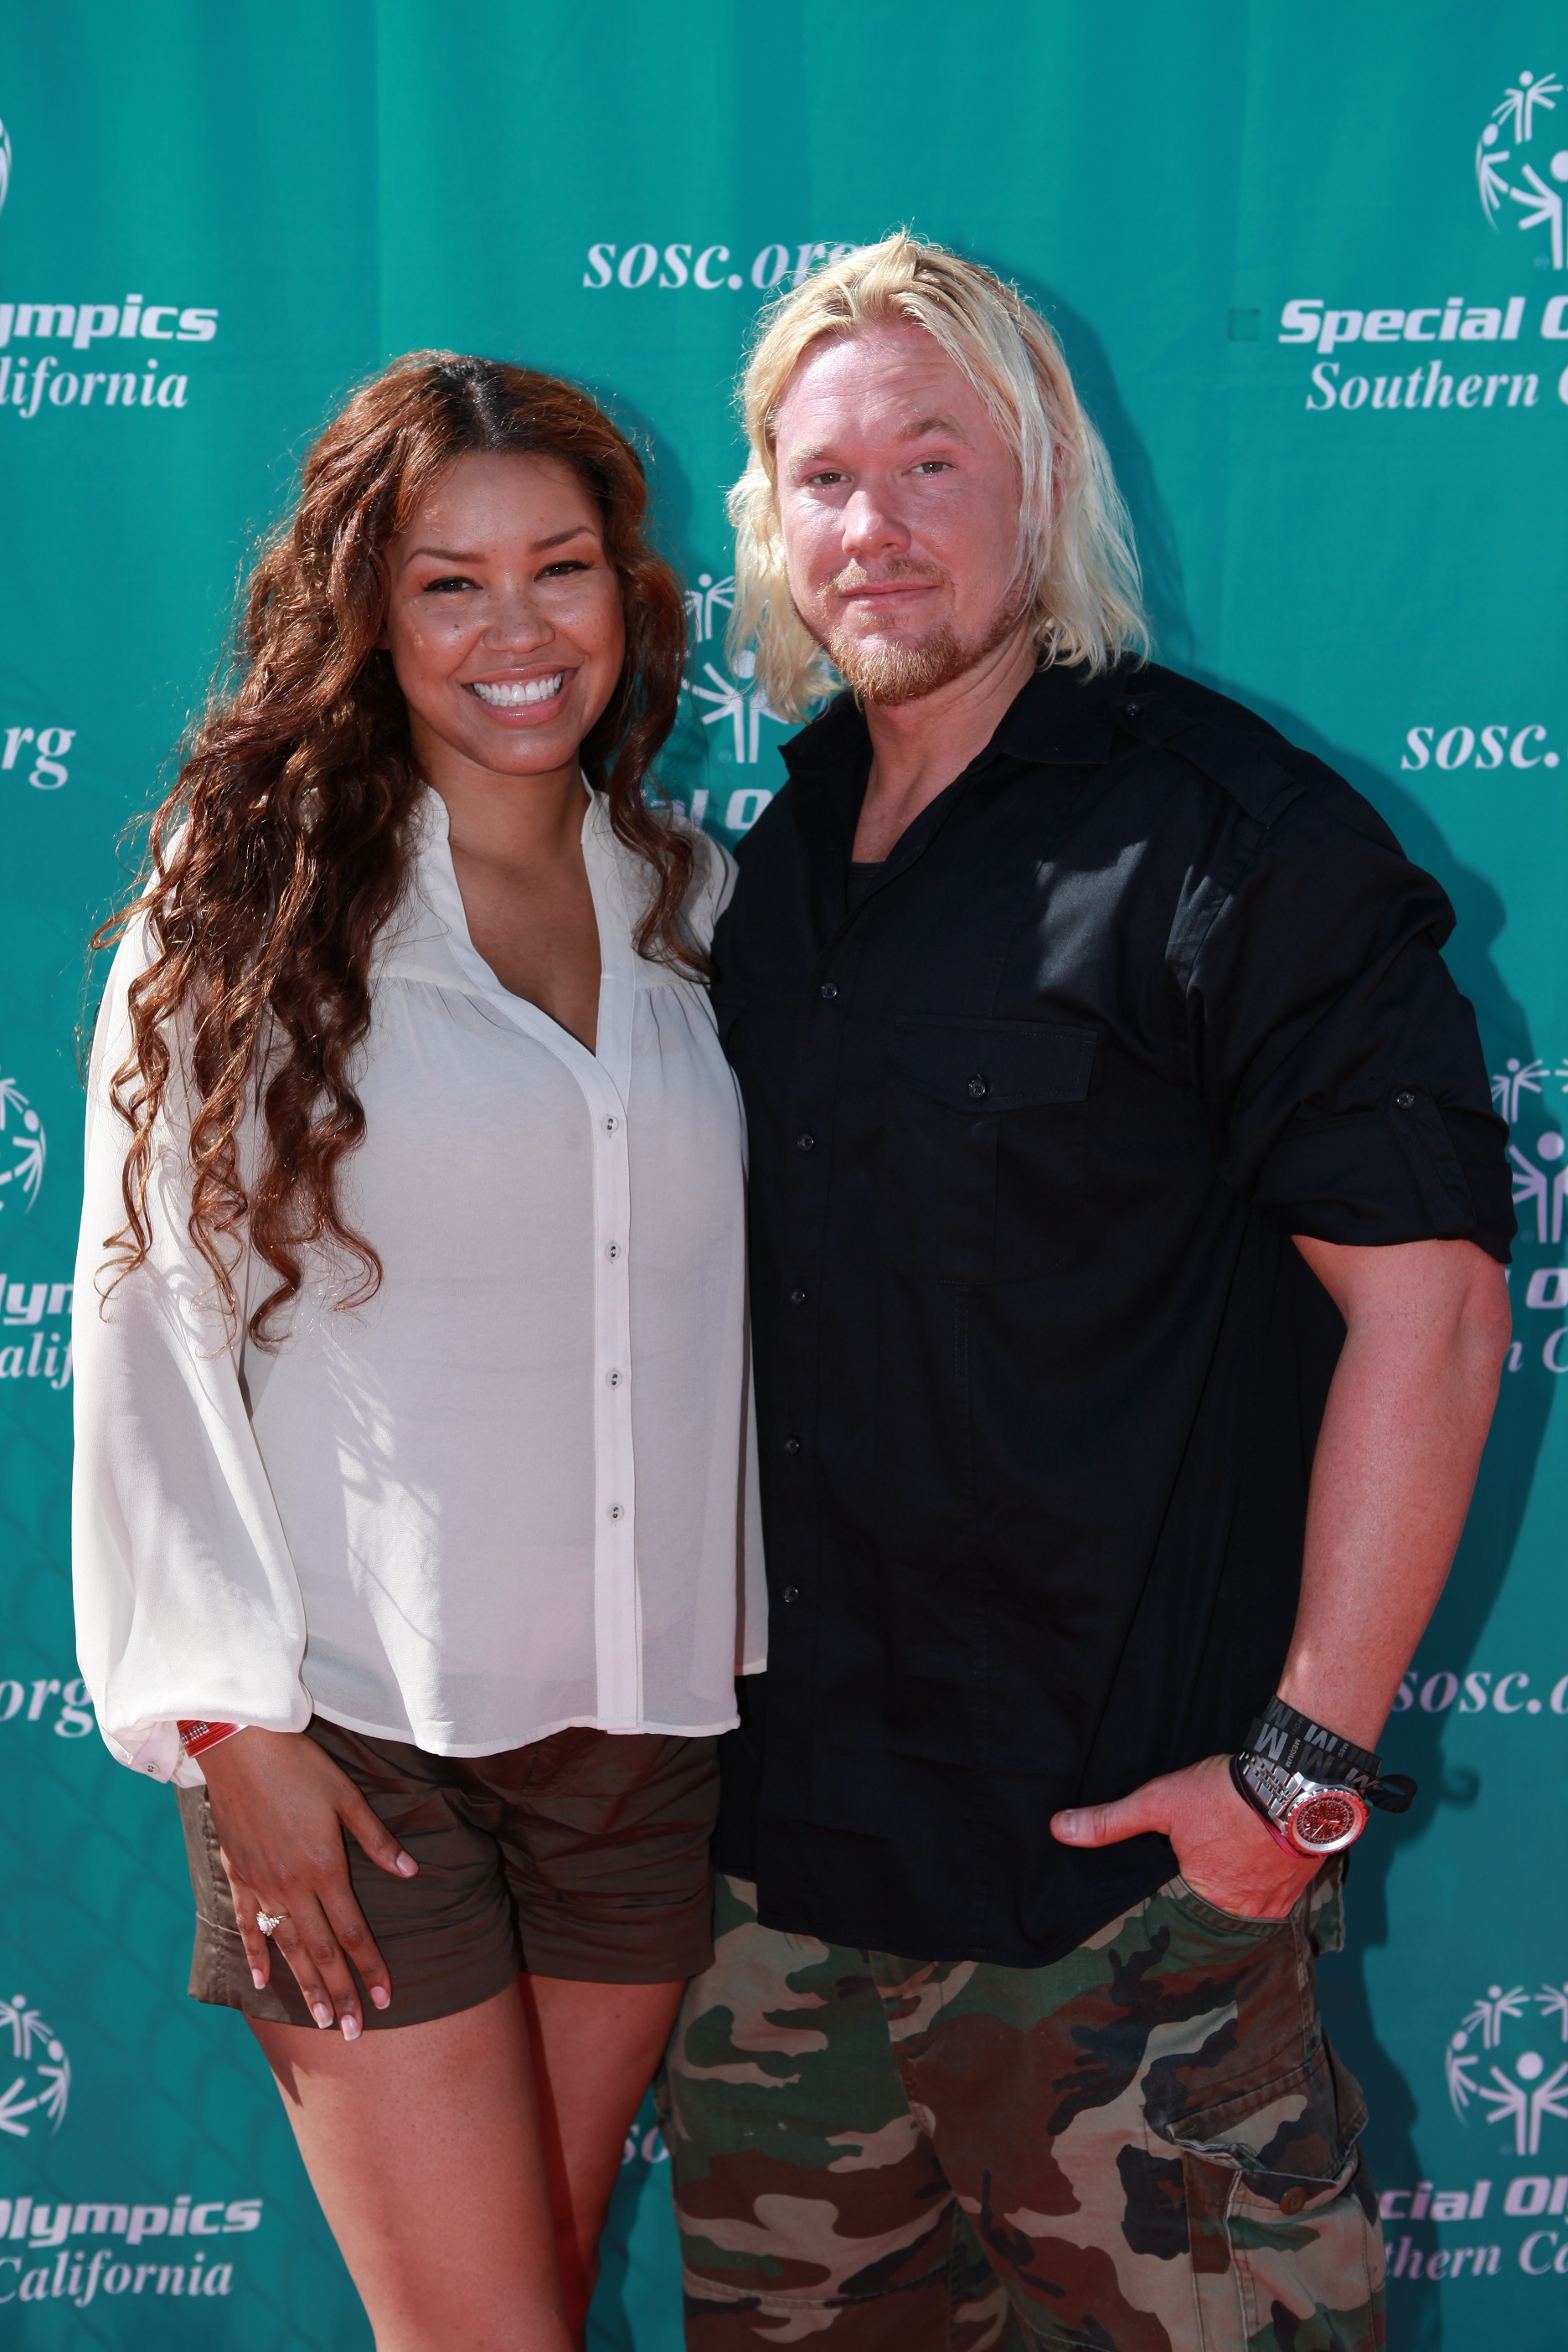 Raquel Bell and Breaux Greer at the 14th Annual Pier del Sol event in Santa Monica.